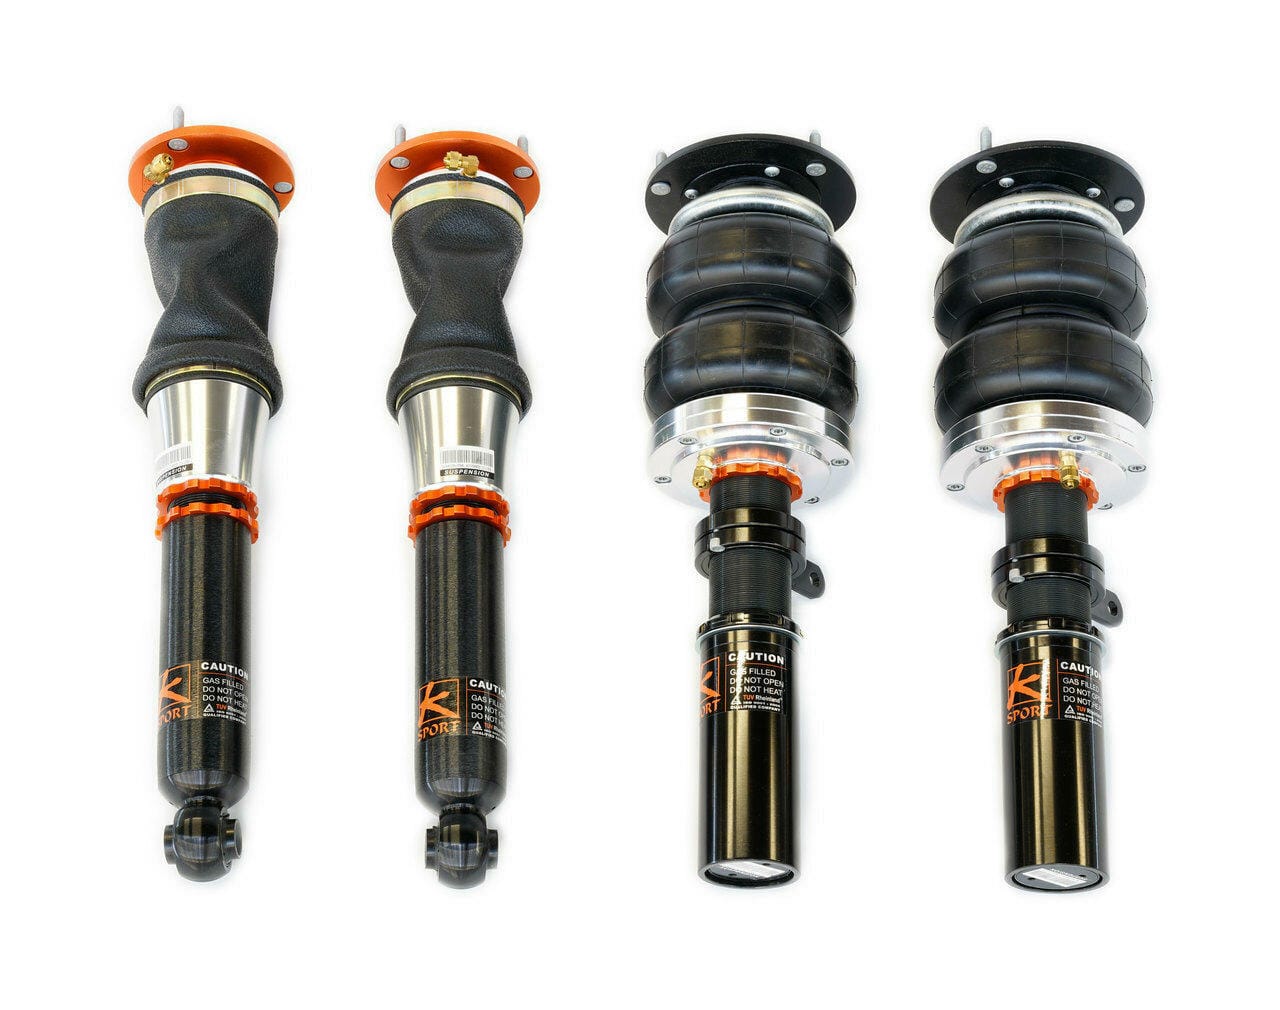 Ksport Airtech Air Suspension System Struts Only - 2002-2006 Infiniti Q45 Requires welding - no spindle F50 CIN120-ASO-01